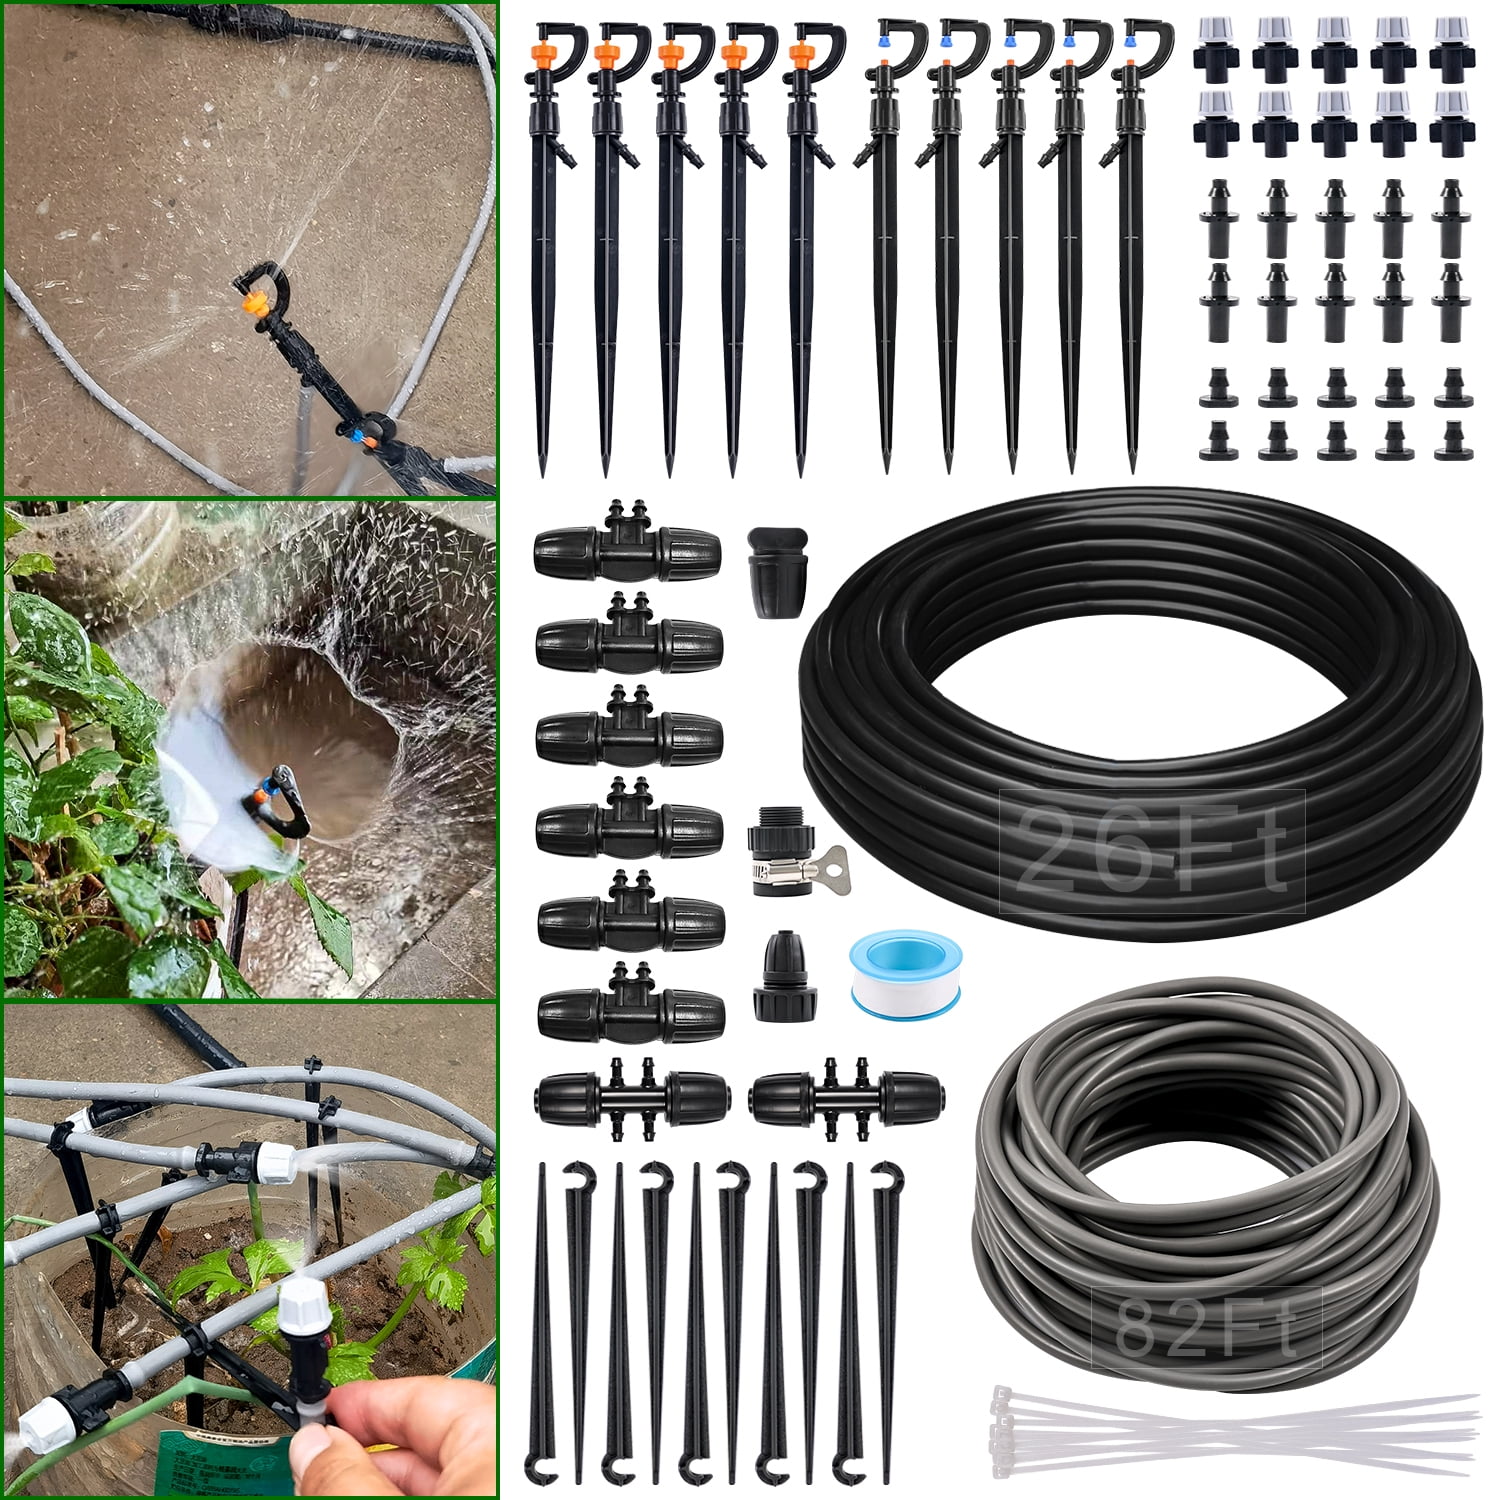 Garden Micro Irrigation System Farm/Yard Auto Watering 4/7mm Tube Pipe Fittings 